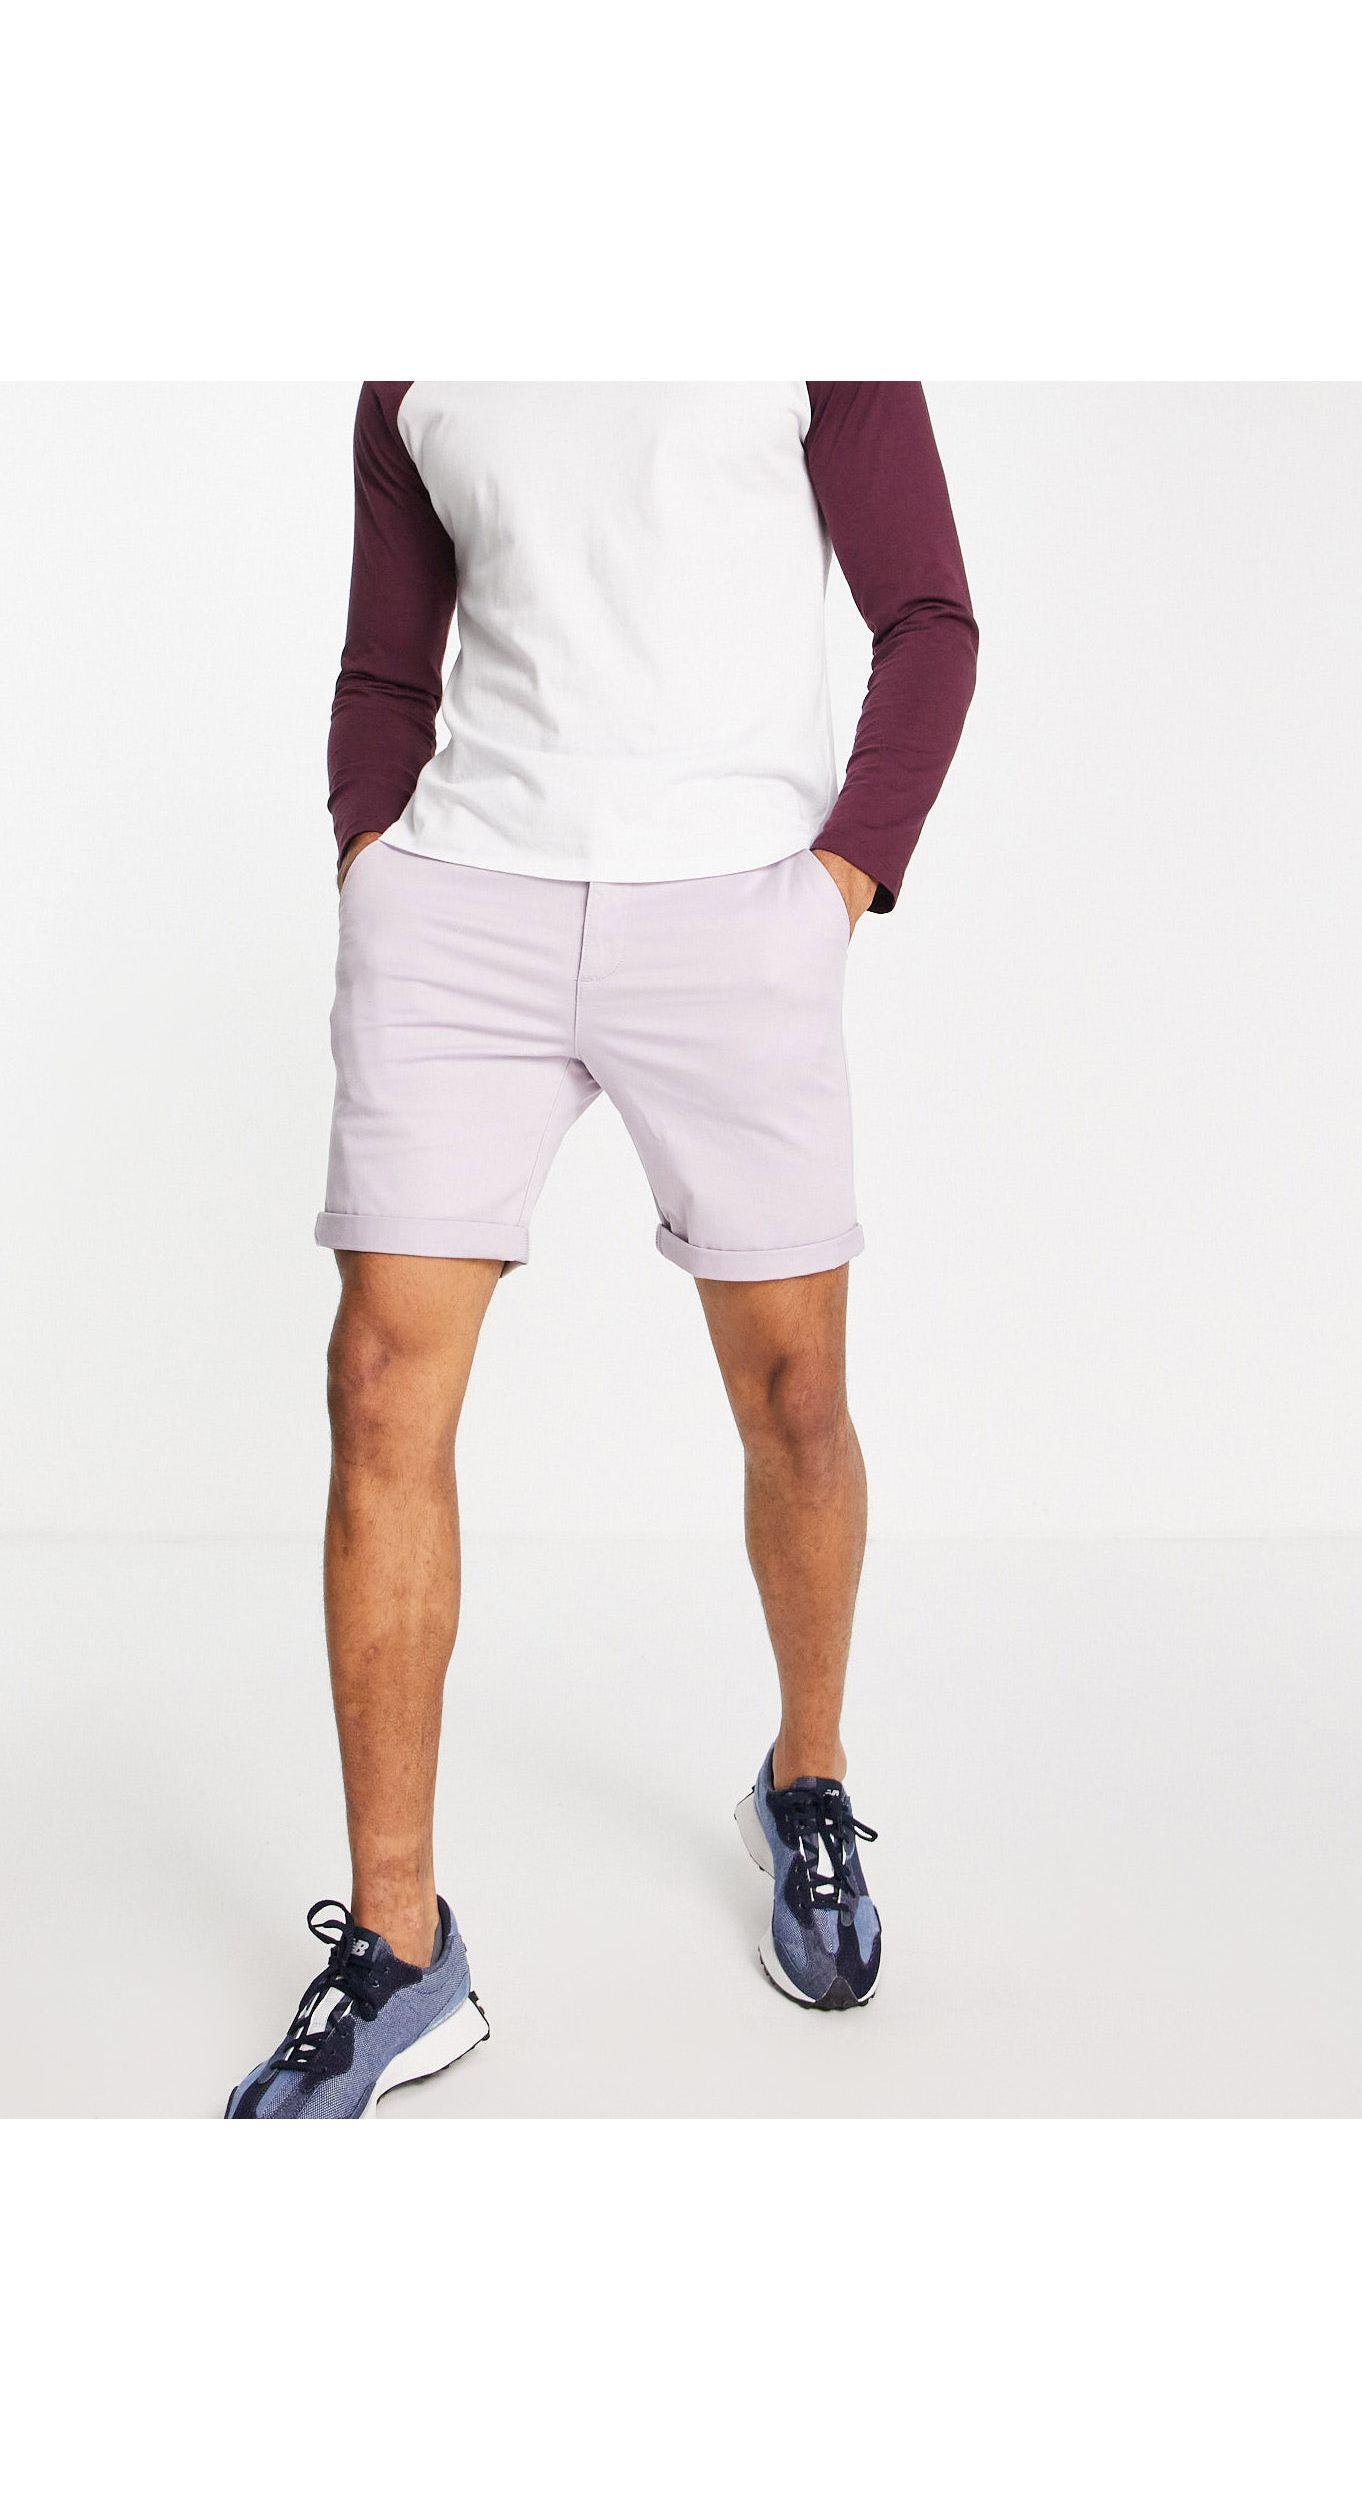 New Look Chino Shorts in Purple for Men - Lyst